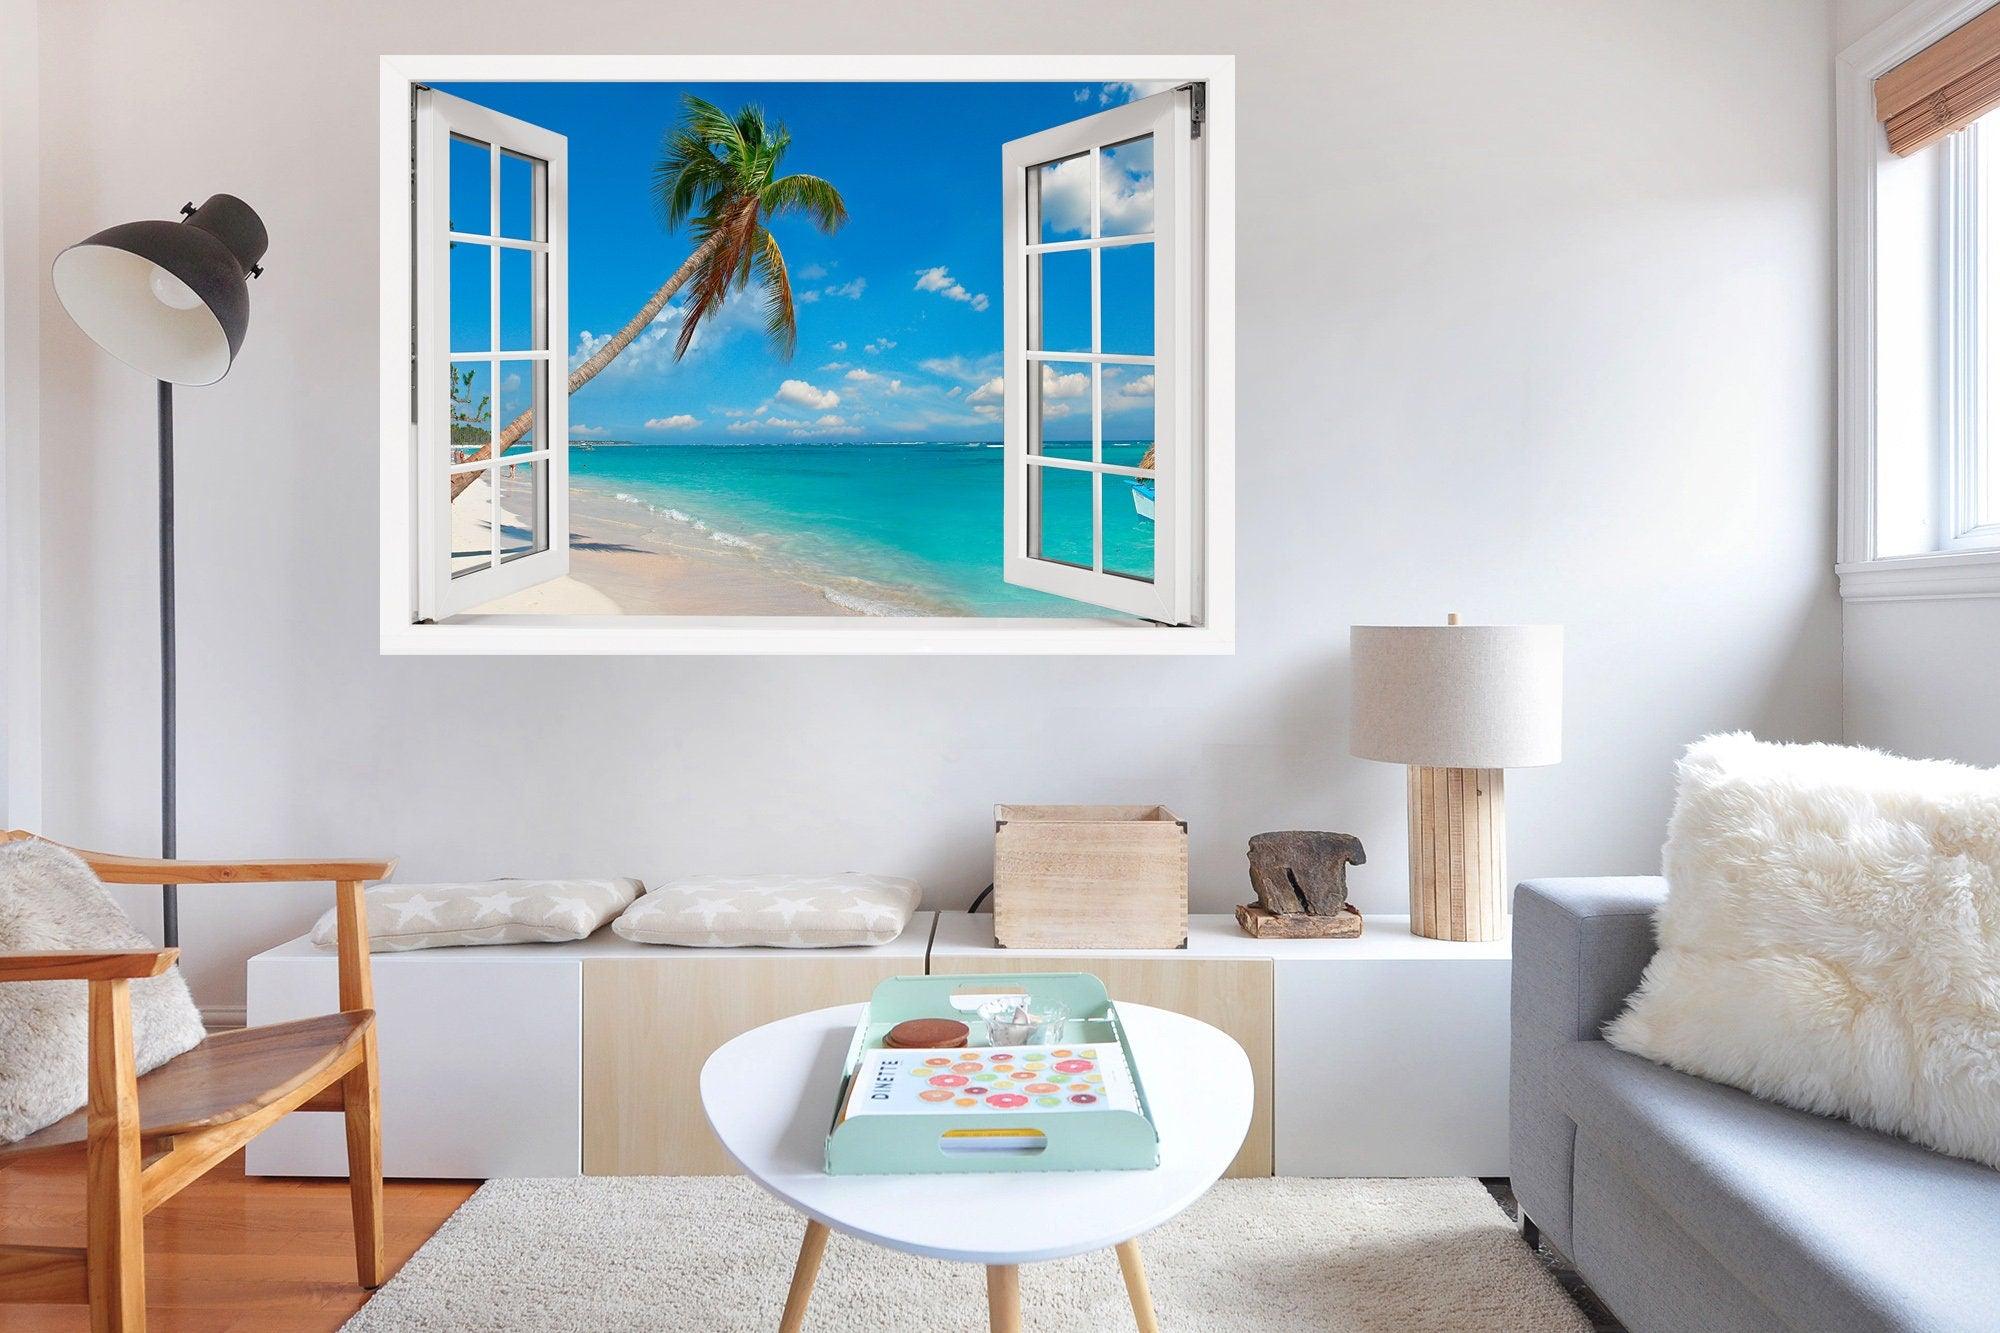 Window Scape Palm Tree over Beach and blue water #20, Window Decal, Sticker Sunset, Removable, Fabric, Window Frame, Office,Bedroom, 3D